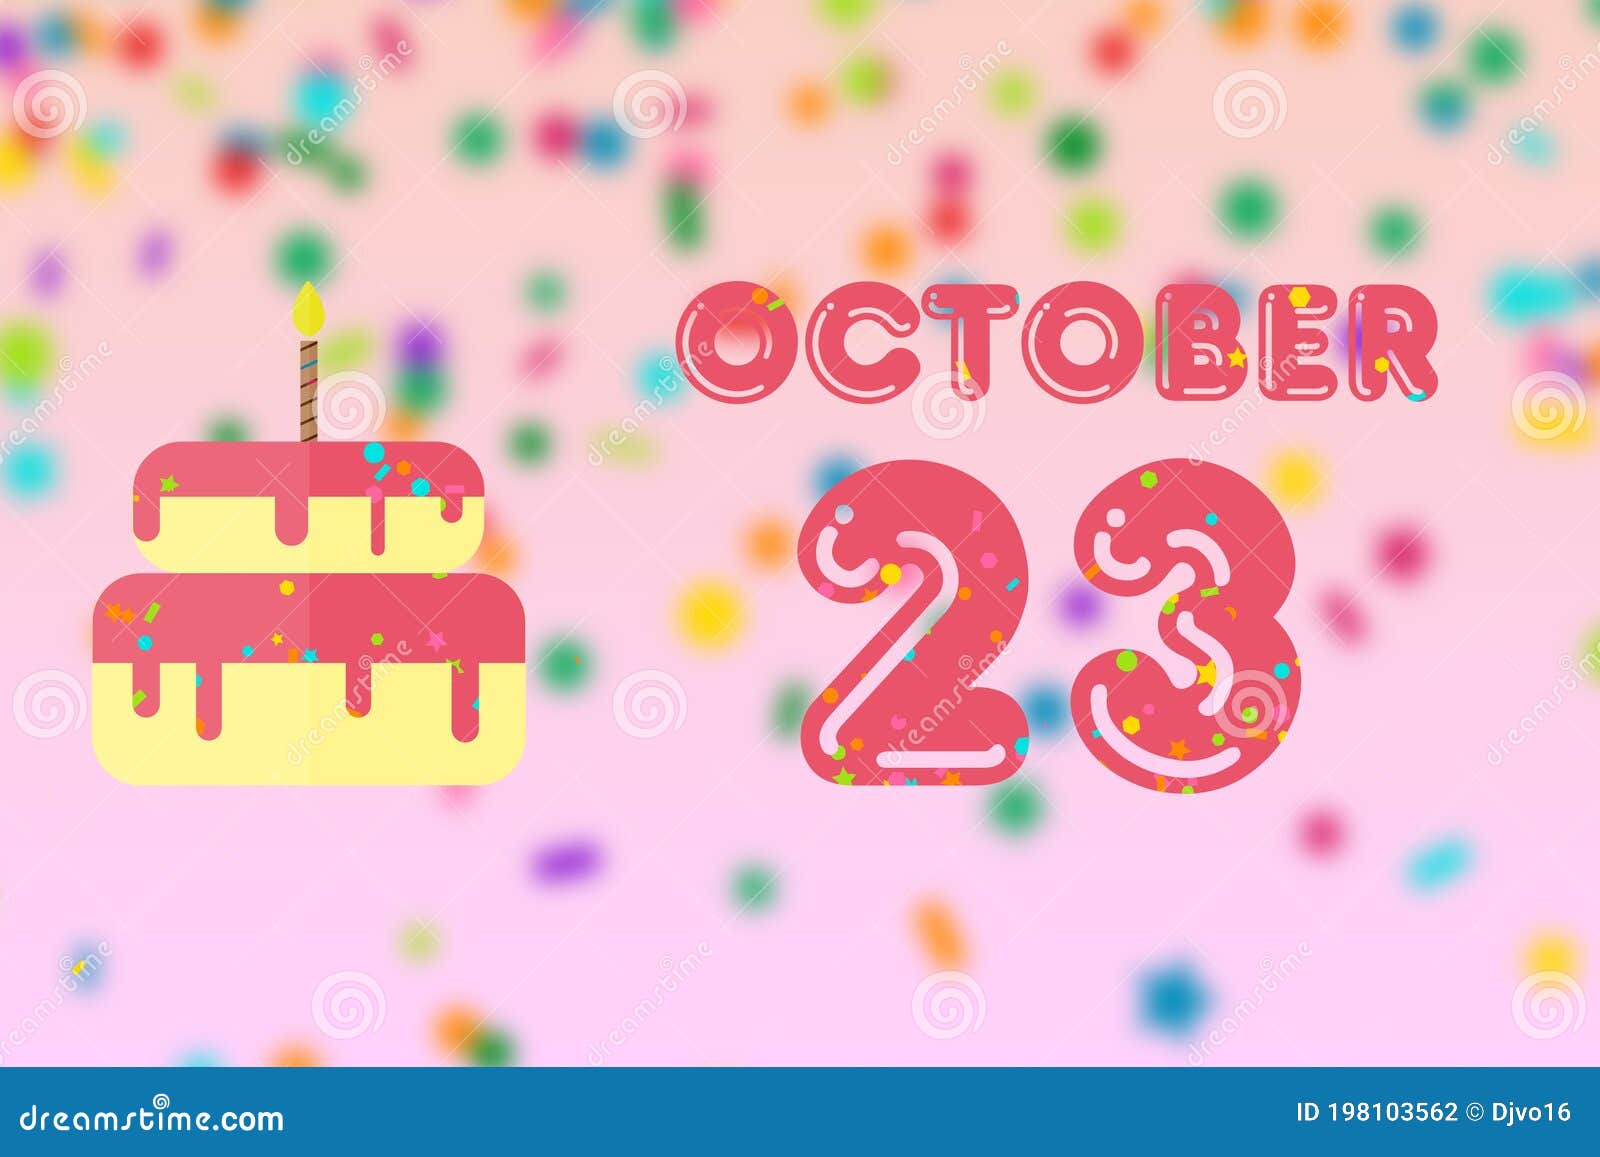 October 23rd. Day 23 of Month,Birthday Greeting Card with Date of Birth and Birthday Cake. Autumn Month, Day of the Year Concept Stock Illustration - Illustration of concept, symbol: 198103562